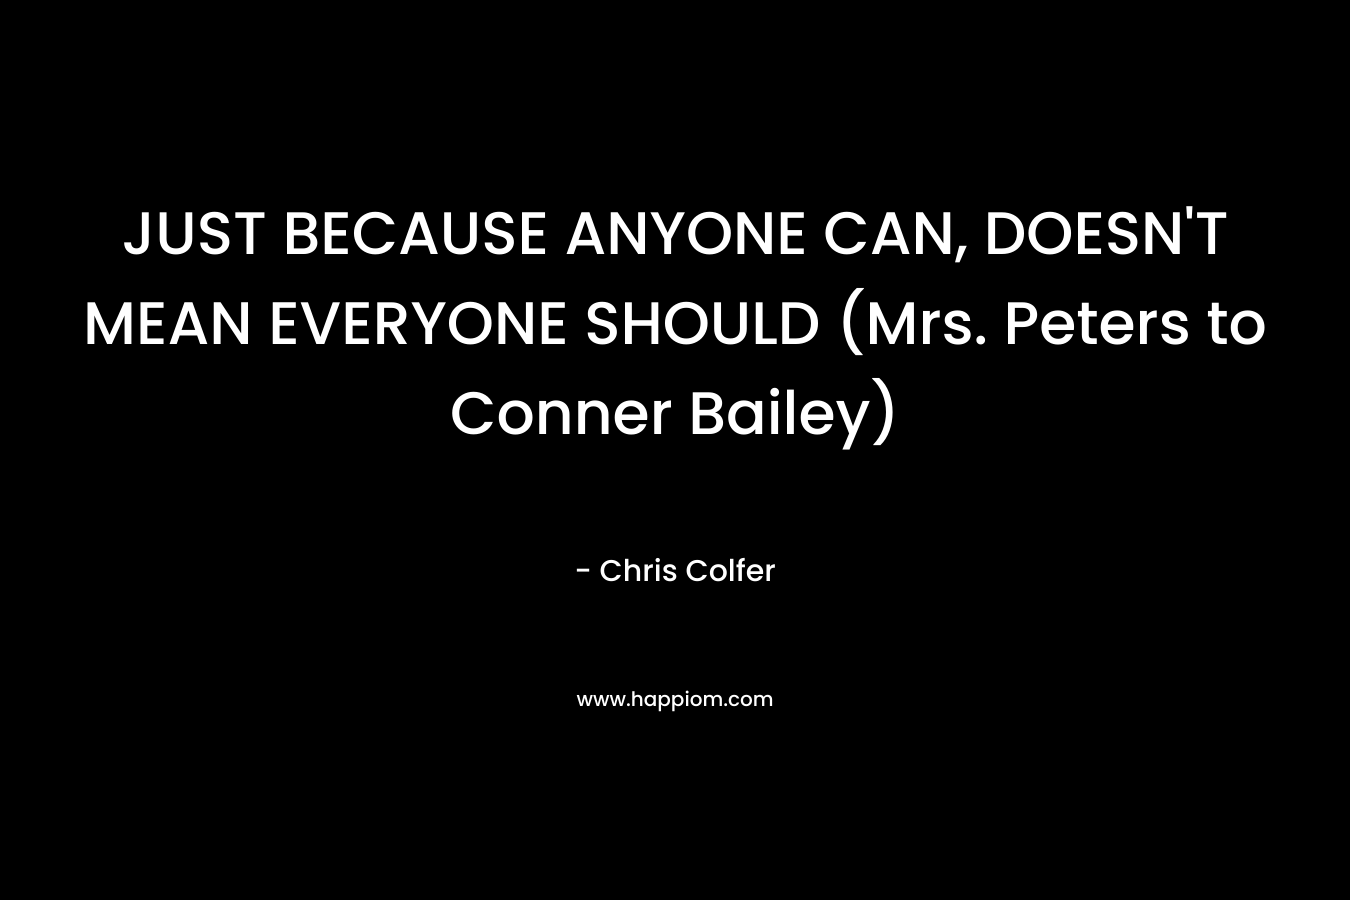 JUST BECAUSE ANYONE CAN, DOESN’T MEAN EVERYONE SHOULD (Mrs. Peters to Conner Bailey) – Chris Colfer